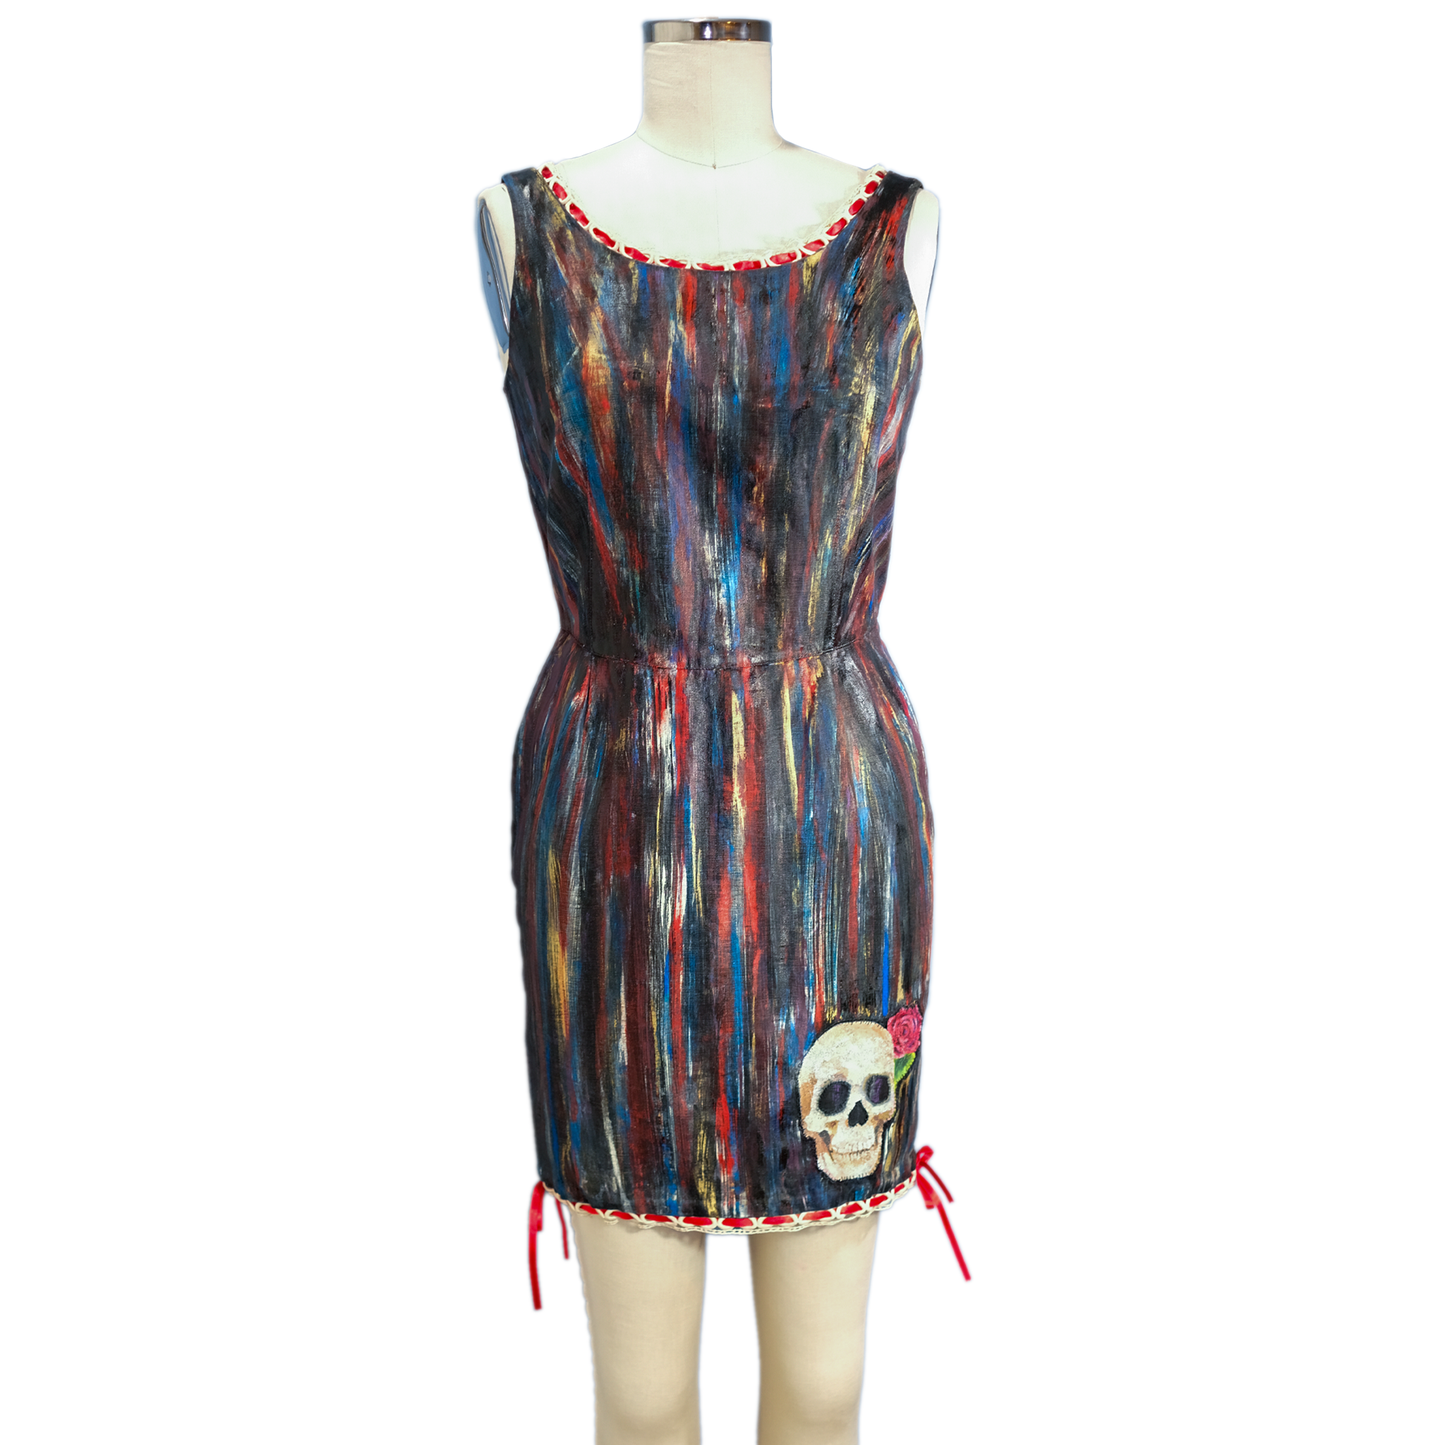 "Scream Queen" - Espirit Collection Dress -Size 7/8 -Up-cycled by Skye De La Rosa